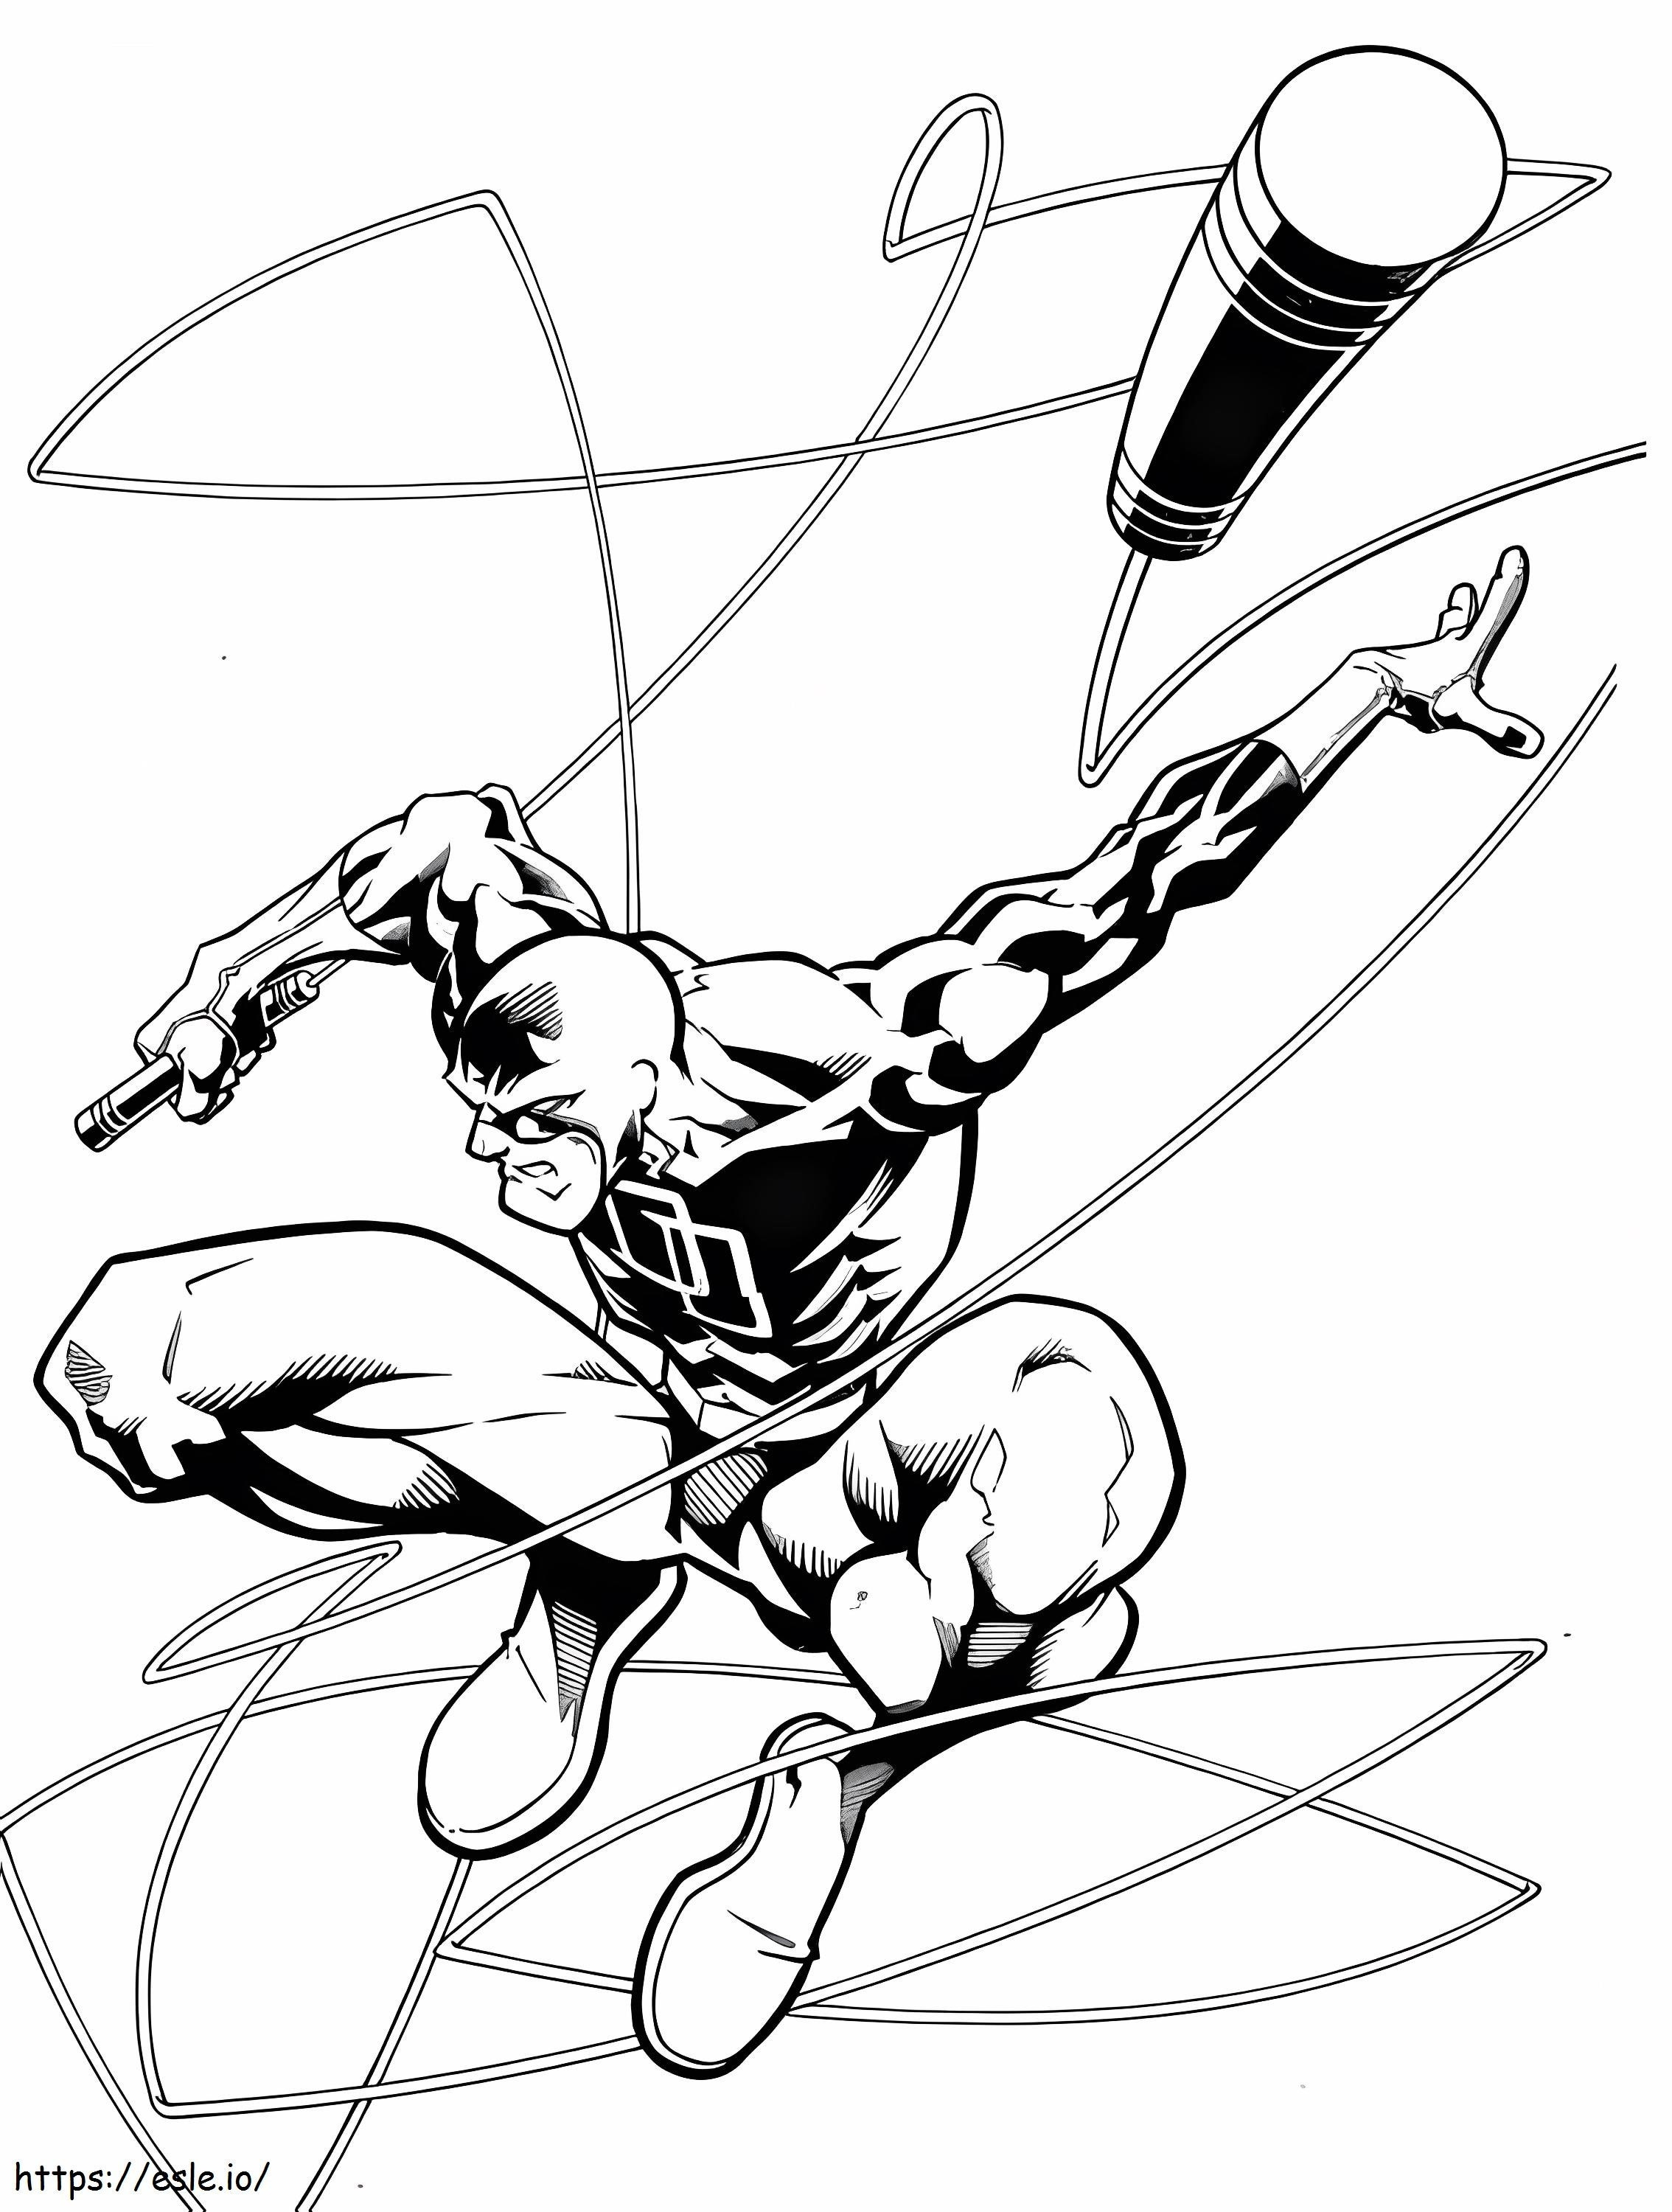 Daredevil Action coloring page